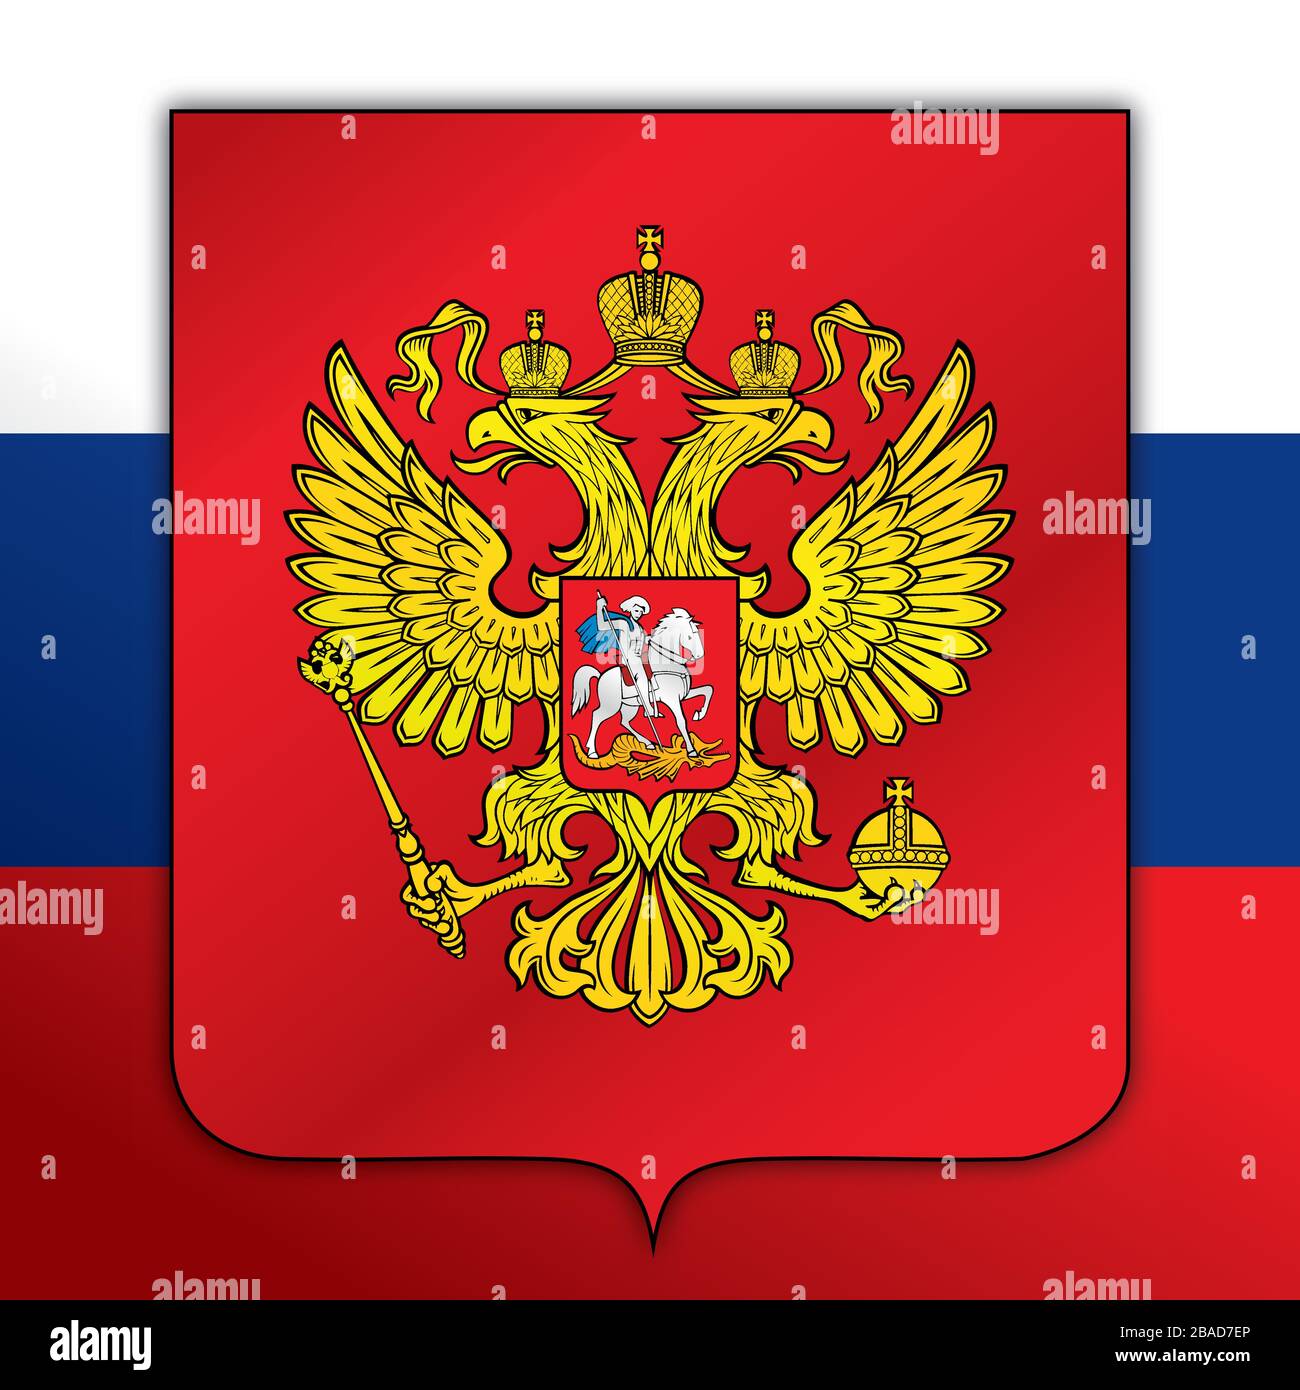 https://c8.alamy.com/comp/2BAD7EP/russia-federation-official-national-flag-and-coat-of-arms-asiatic-and-european-country-vector-illustration-2BAD7EP.jpg